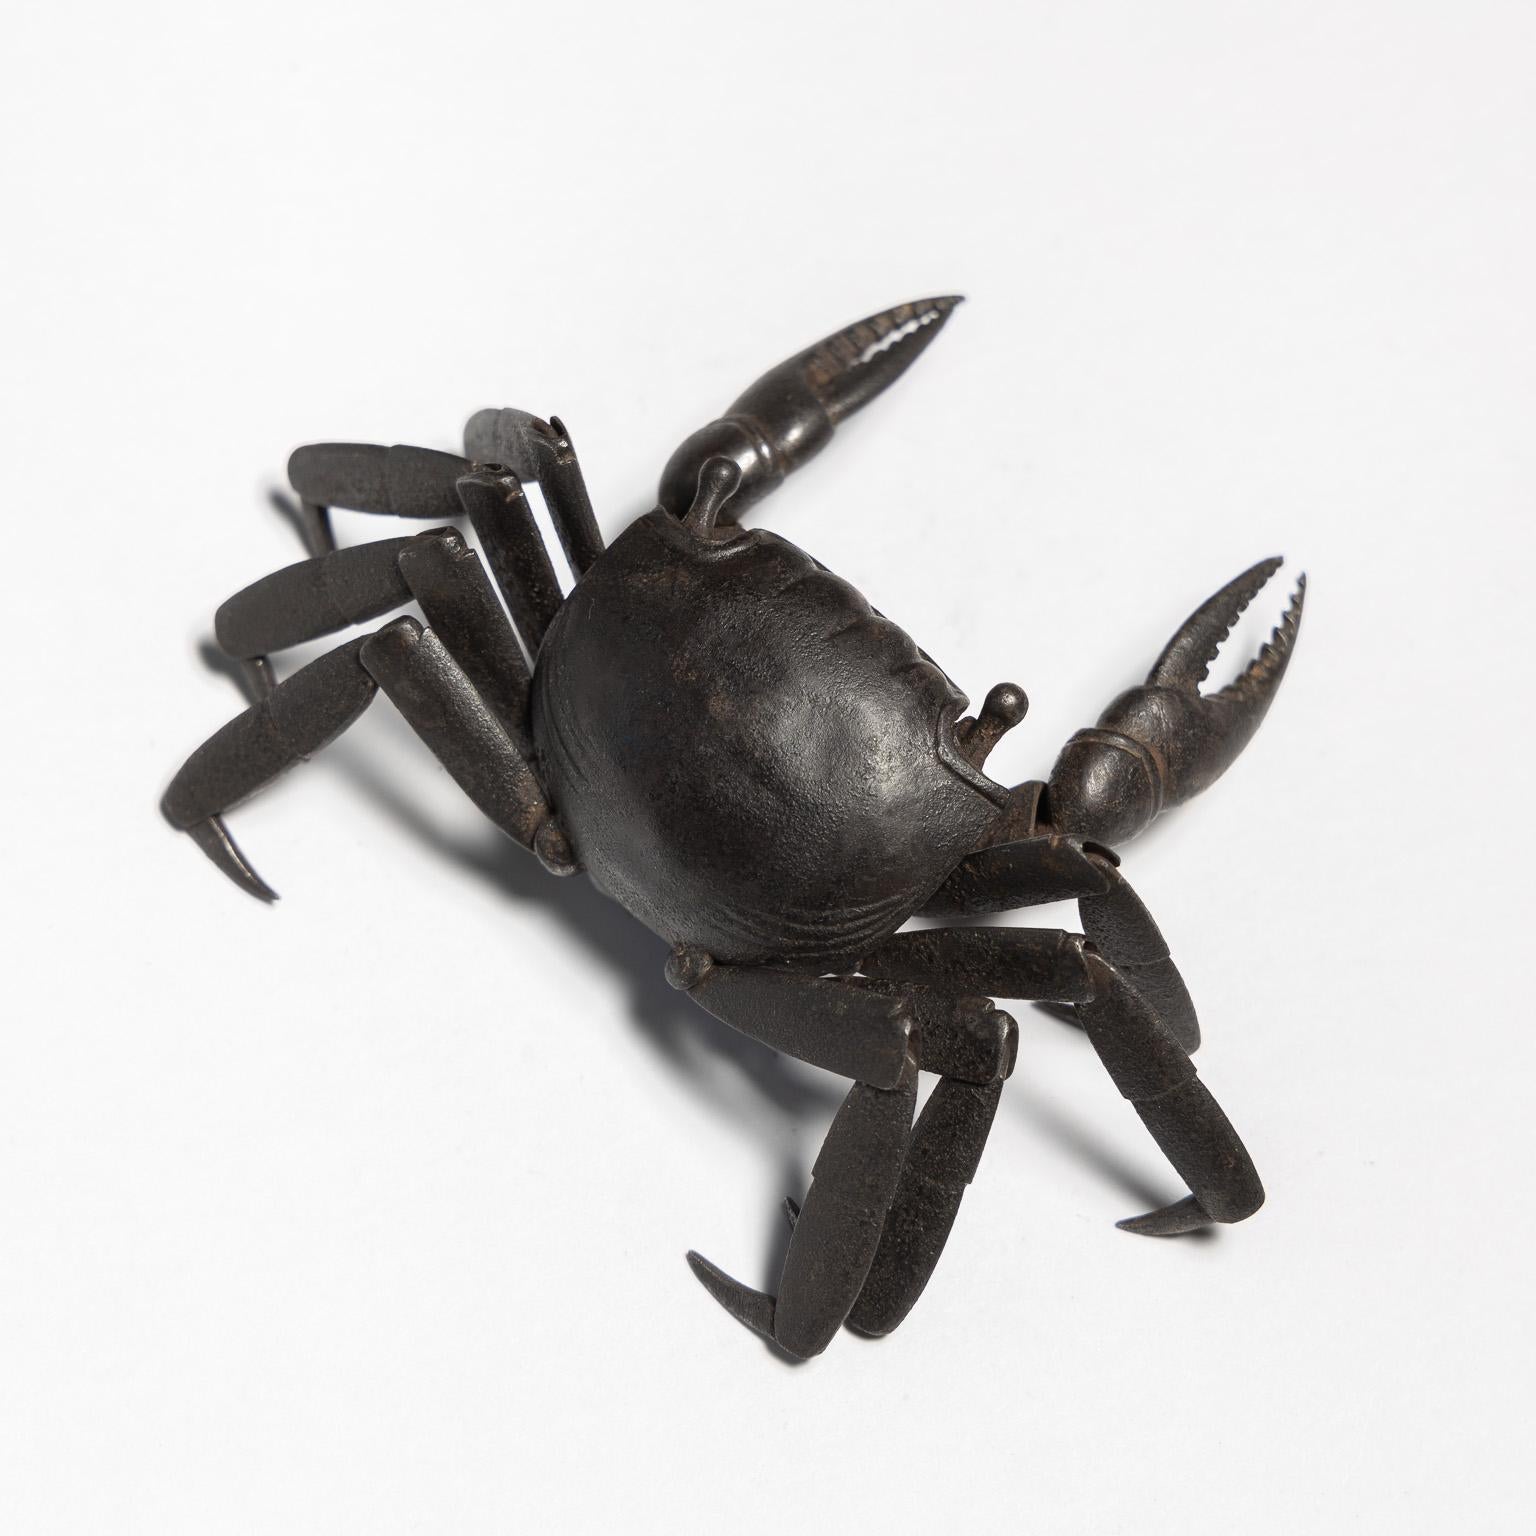 Jizai Okimono
A russet-iron articulated figure of a crab

Edo Period (1615 - 1867), 19th Century

Length: 15 cm with extended limbs

 

The iron crab is constructed of numerous hammered plates, jointed inside the body; the claws open and